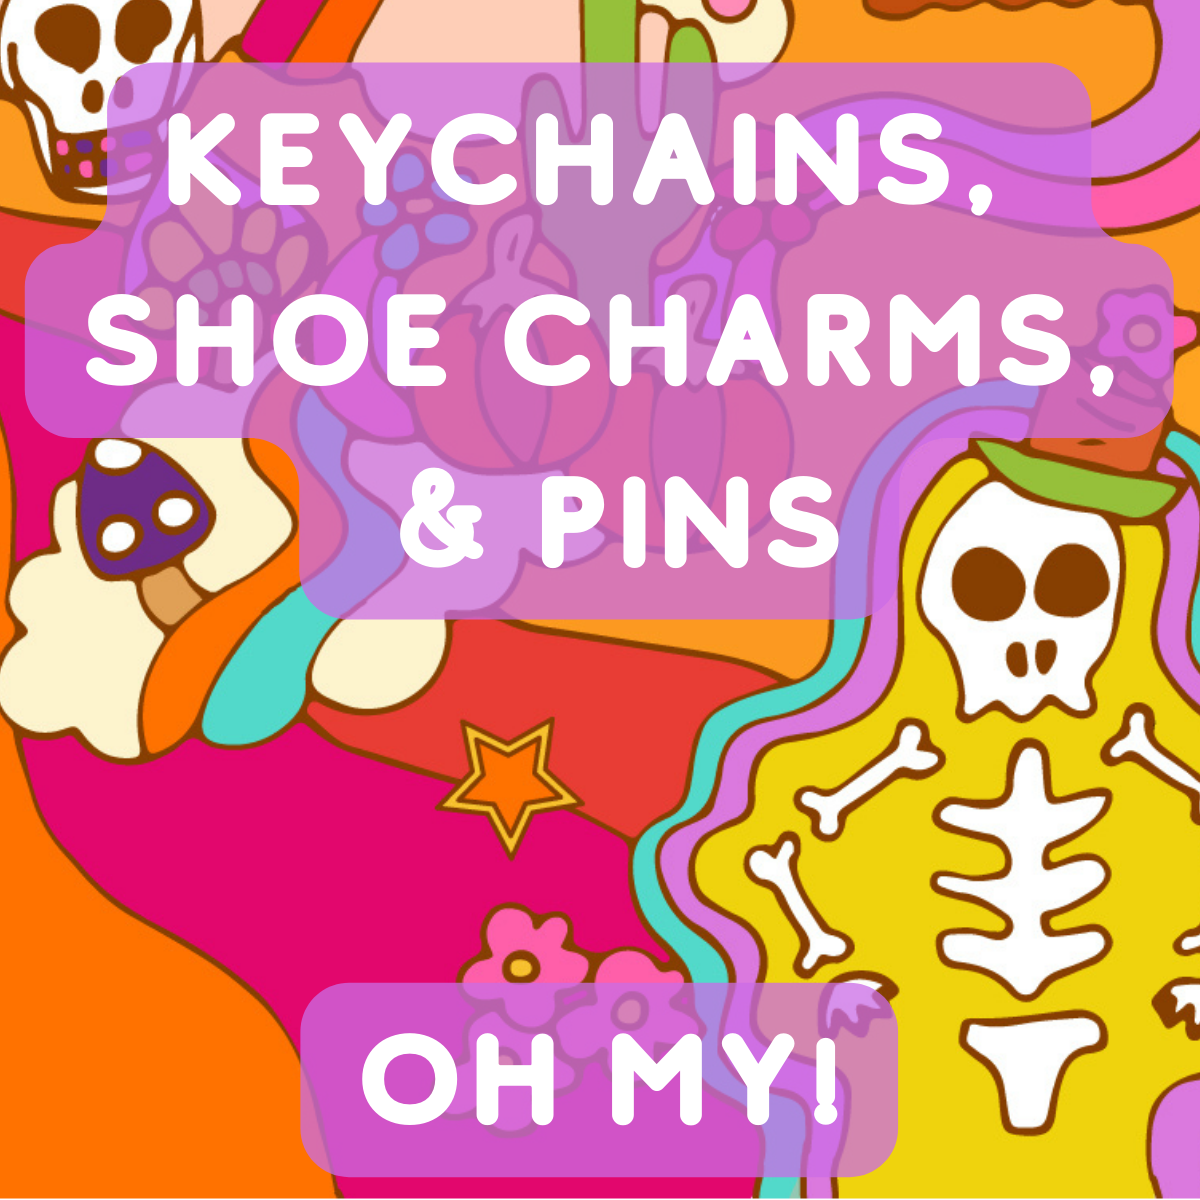 Keychains, Shoe Charms, & Pins... OH MY!